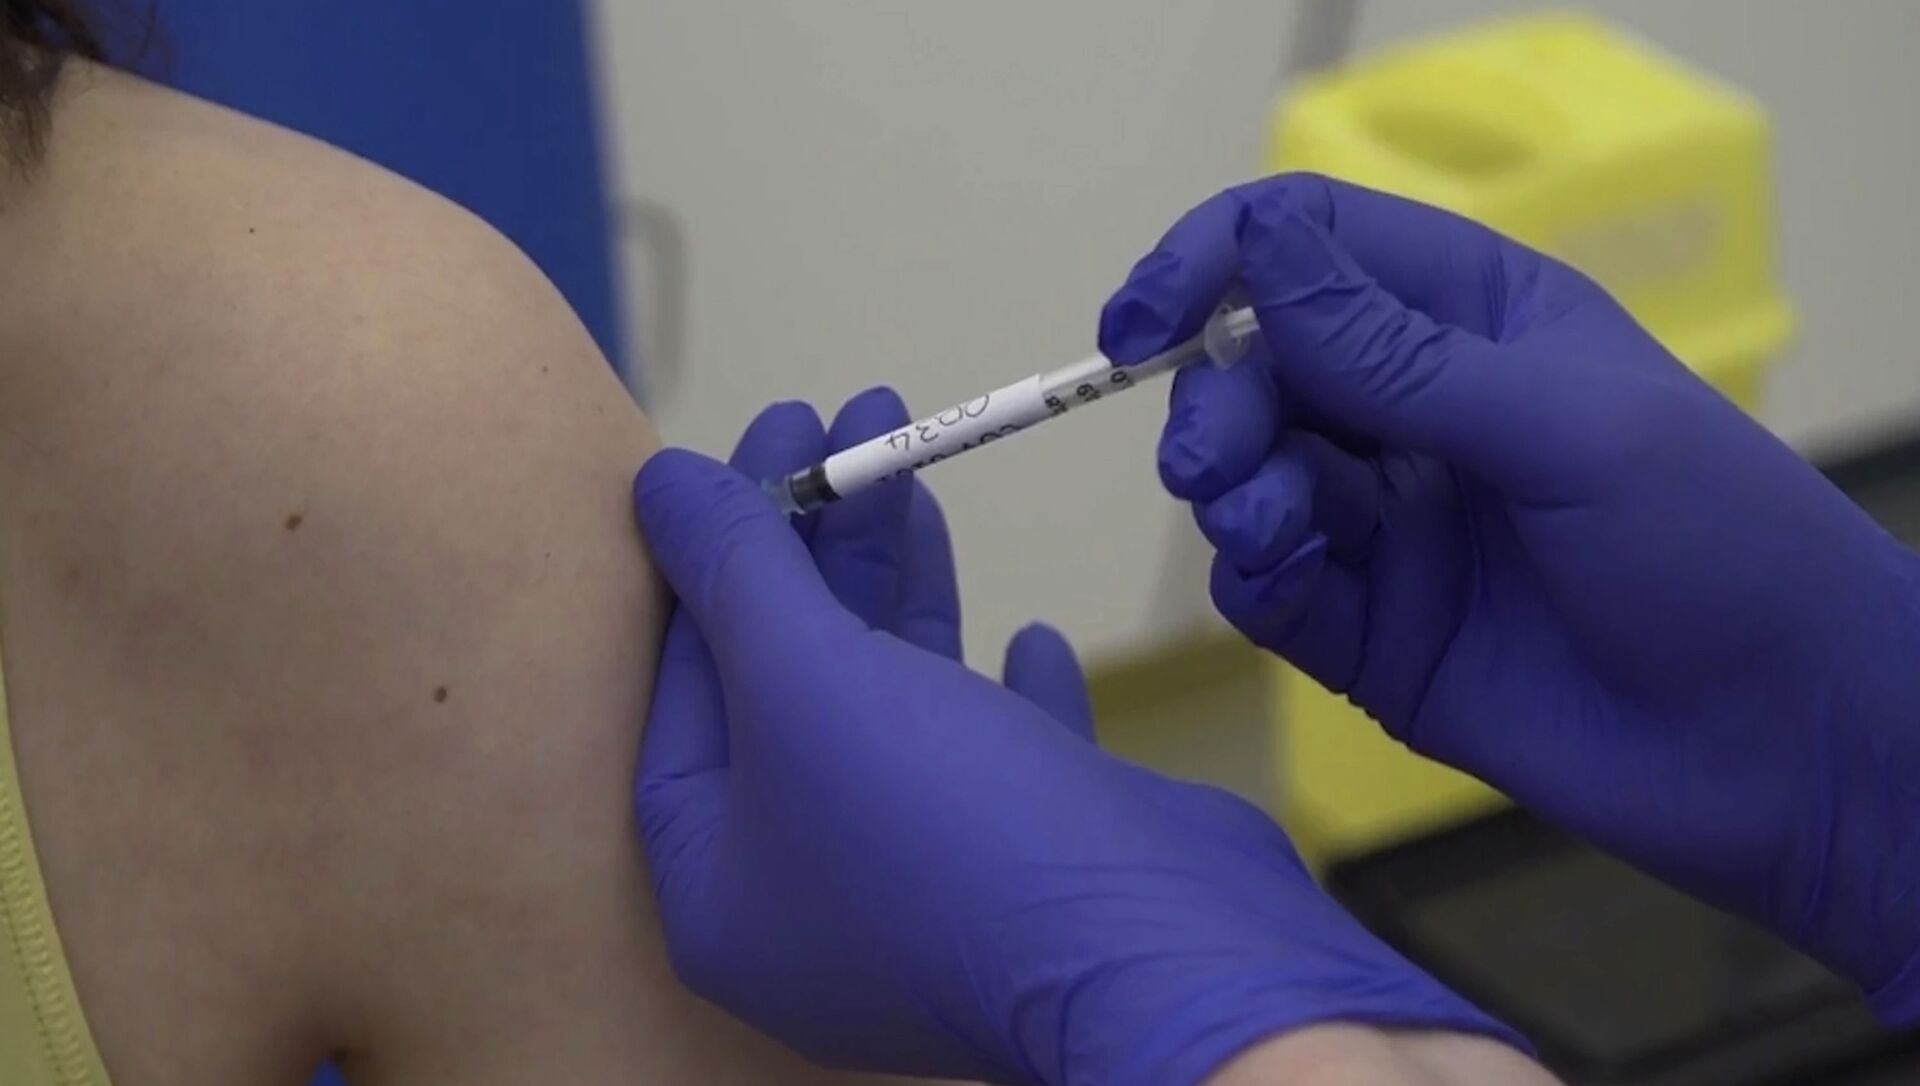 Screen grab taken from video issued by Britain's Oxford University, showing microbiologist Elisa Granato, being injected as part of the first human trials in the UK for a potential coronavirus vaccine, untaken by Oxford University, England, Thursday April 23, 2020 - Sputnik International, 1920, 17.02.2021